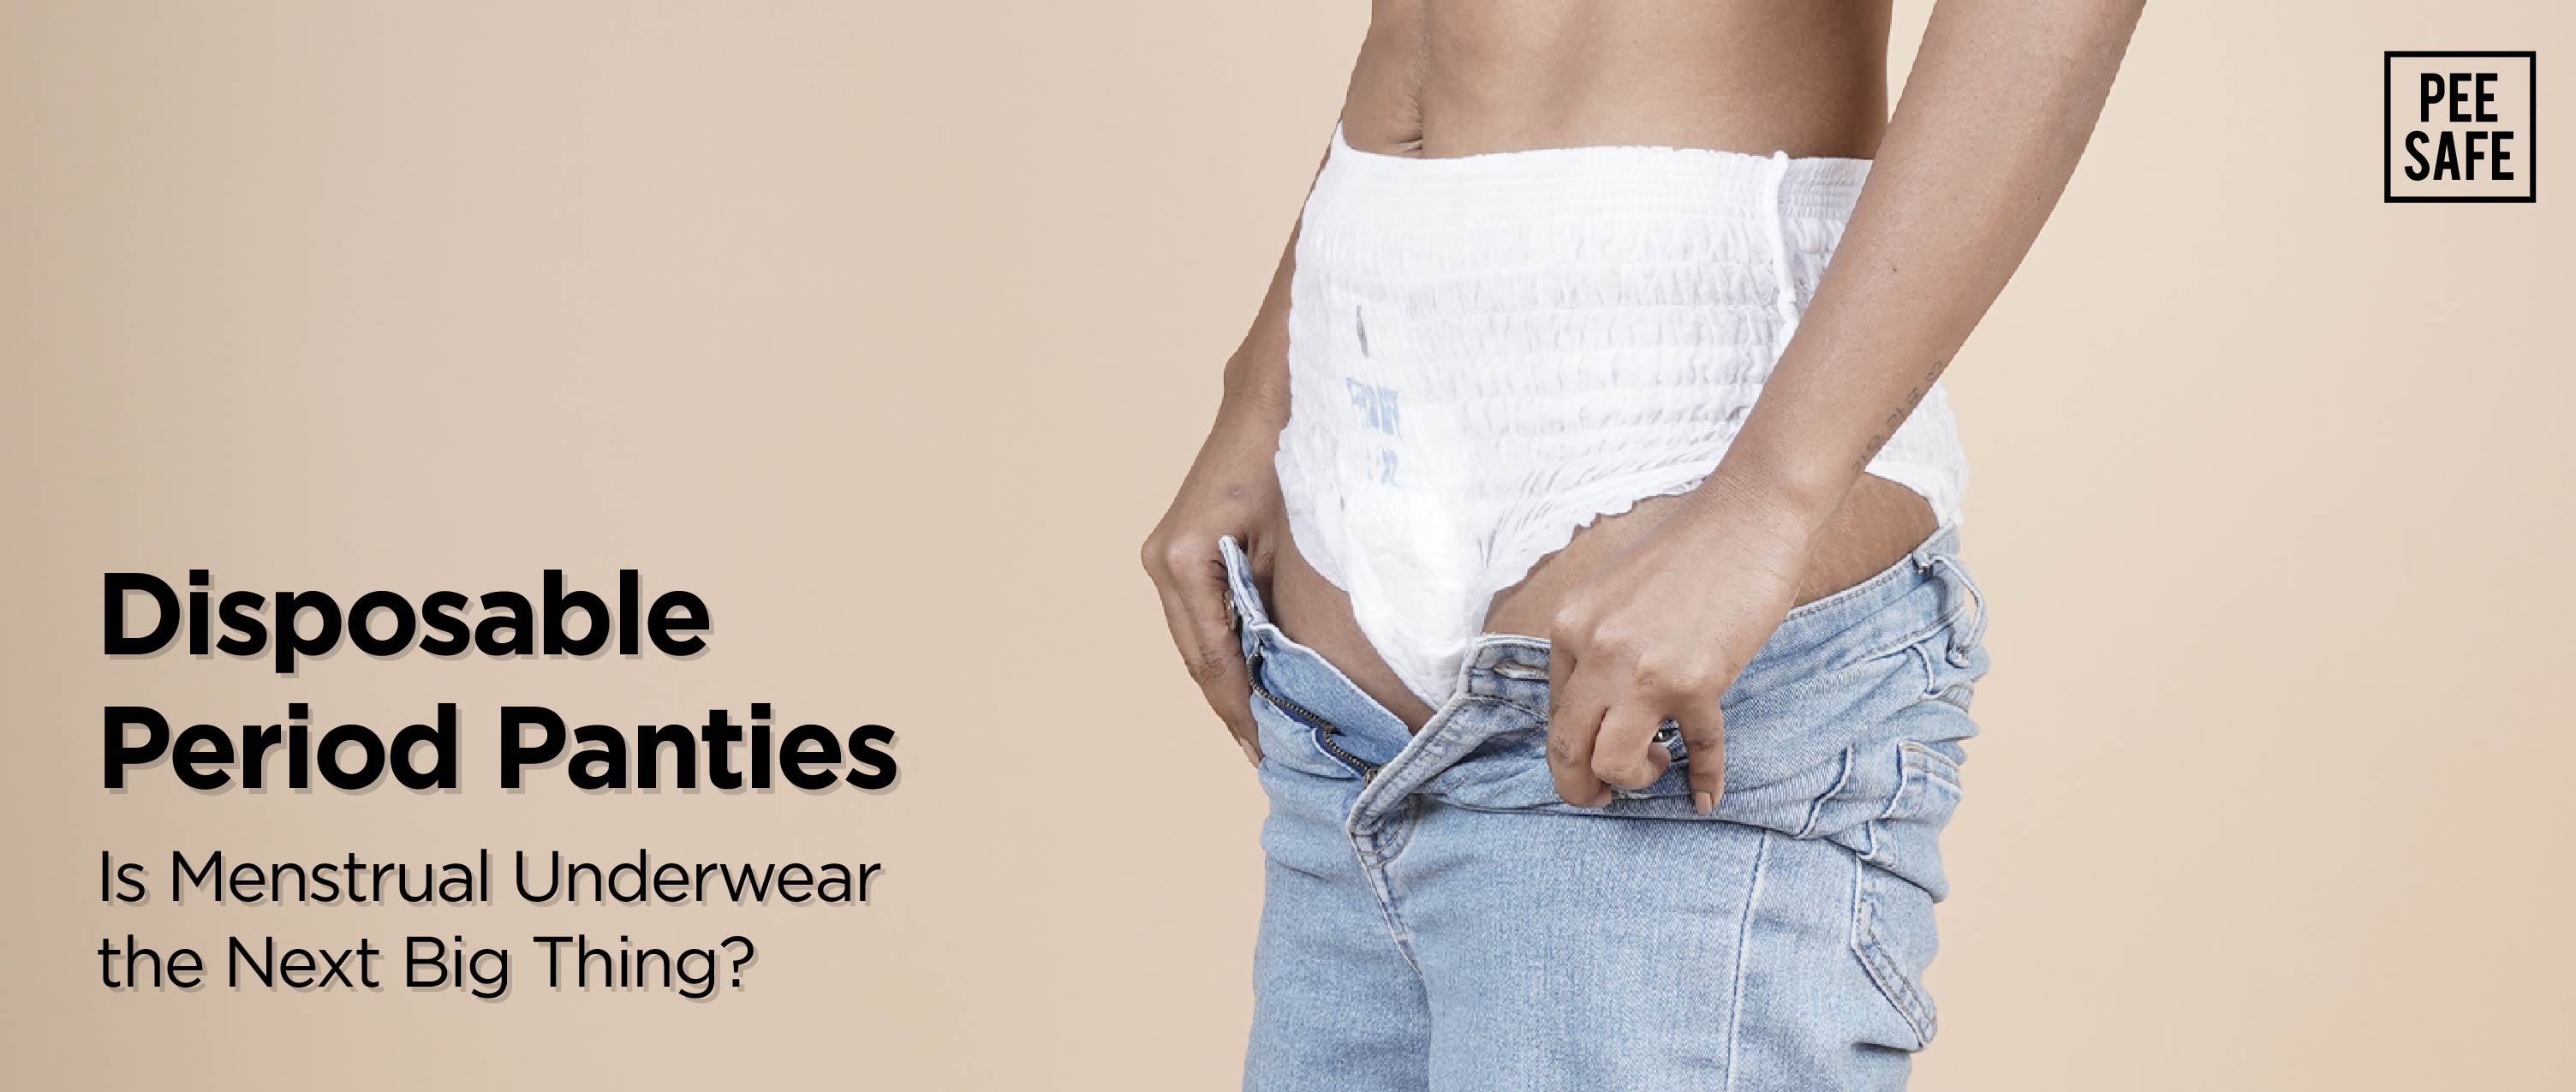 Disposable Period Panties: Is Menstrual Underwear the Next Big Thing?